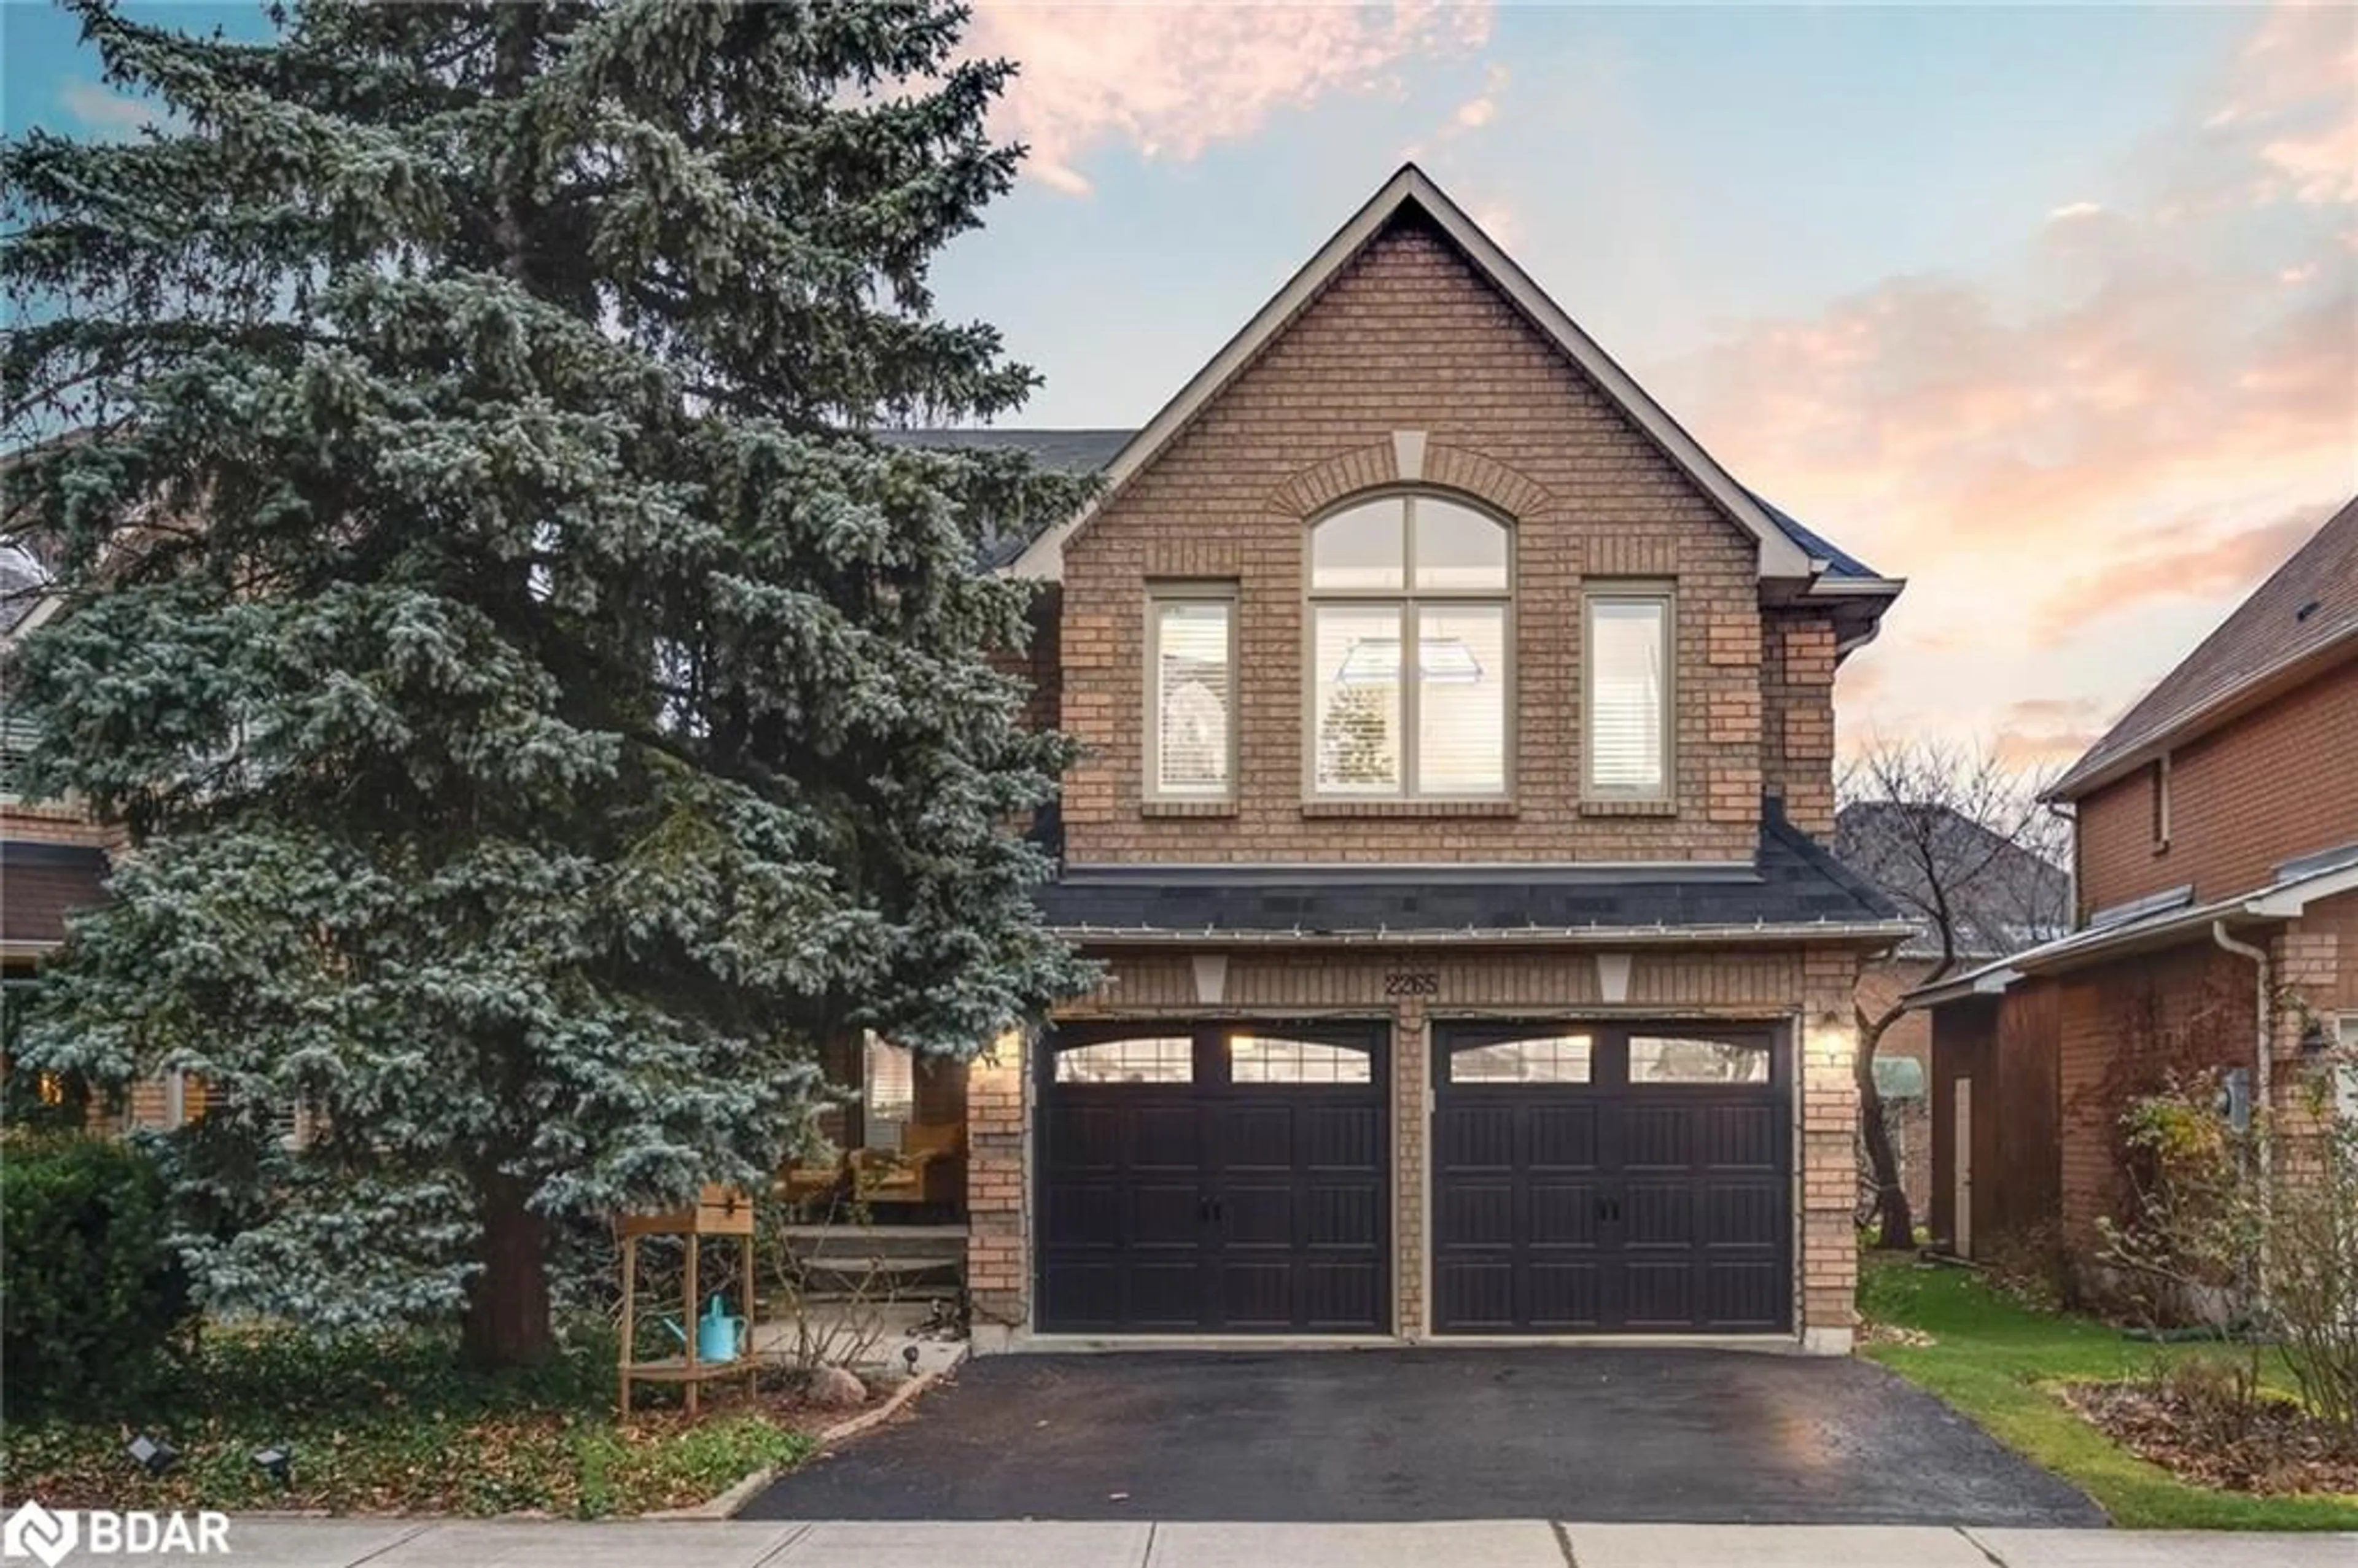 Home with brick exterior material for 2265 Brays Lane, Oakville Ontario L6M 3J5